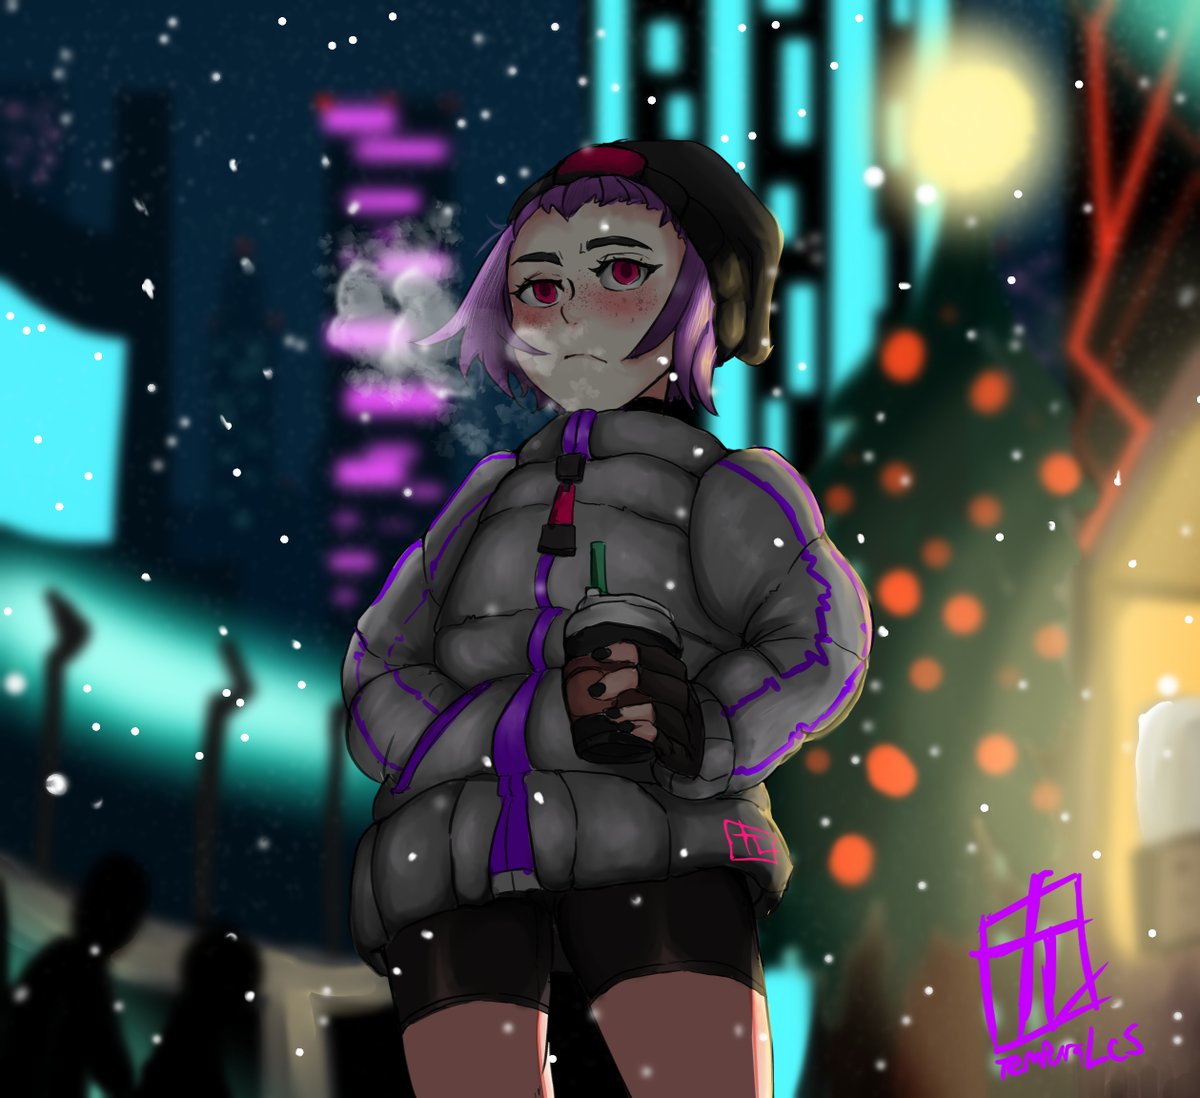 Hello, yeah its kind of late but i want to say properly Merry christmast for you people, here have a chocolate with hazelnut syrup and extra layer of puffy wintercoat.

Ellie is too cold to show her navel this time of year 

#originalcharacter #digitalart #Christmas #XMAS2021